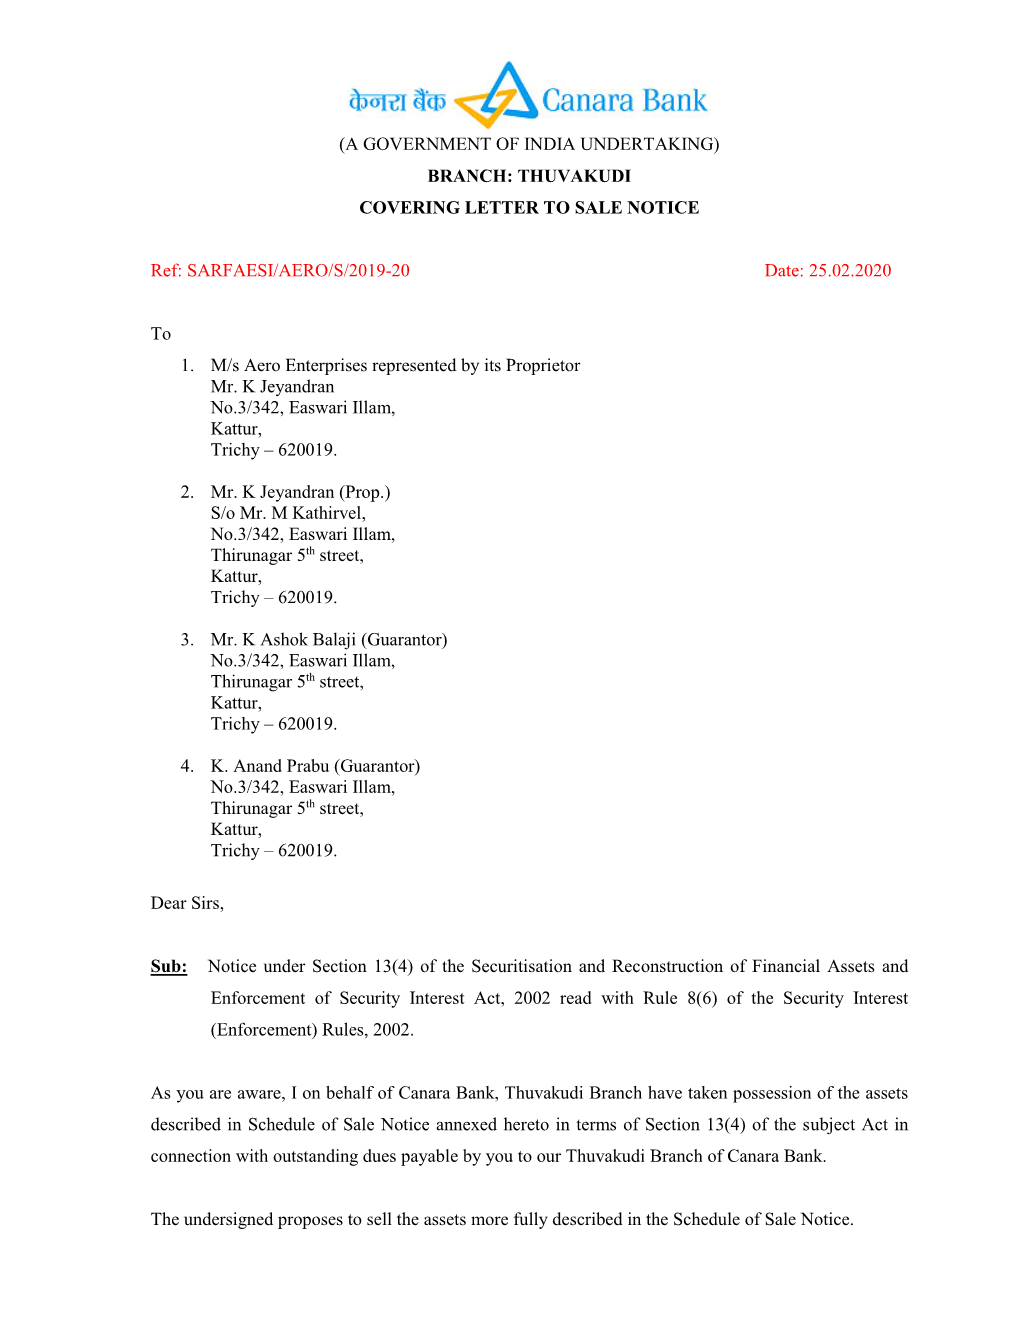 Thuvakudi Covering Letter to Sale Notice